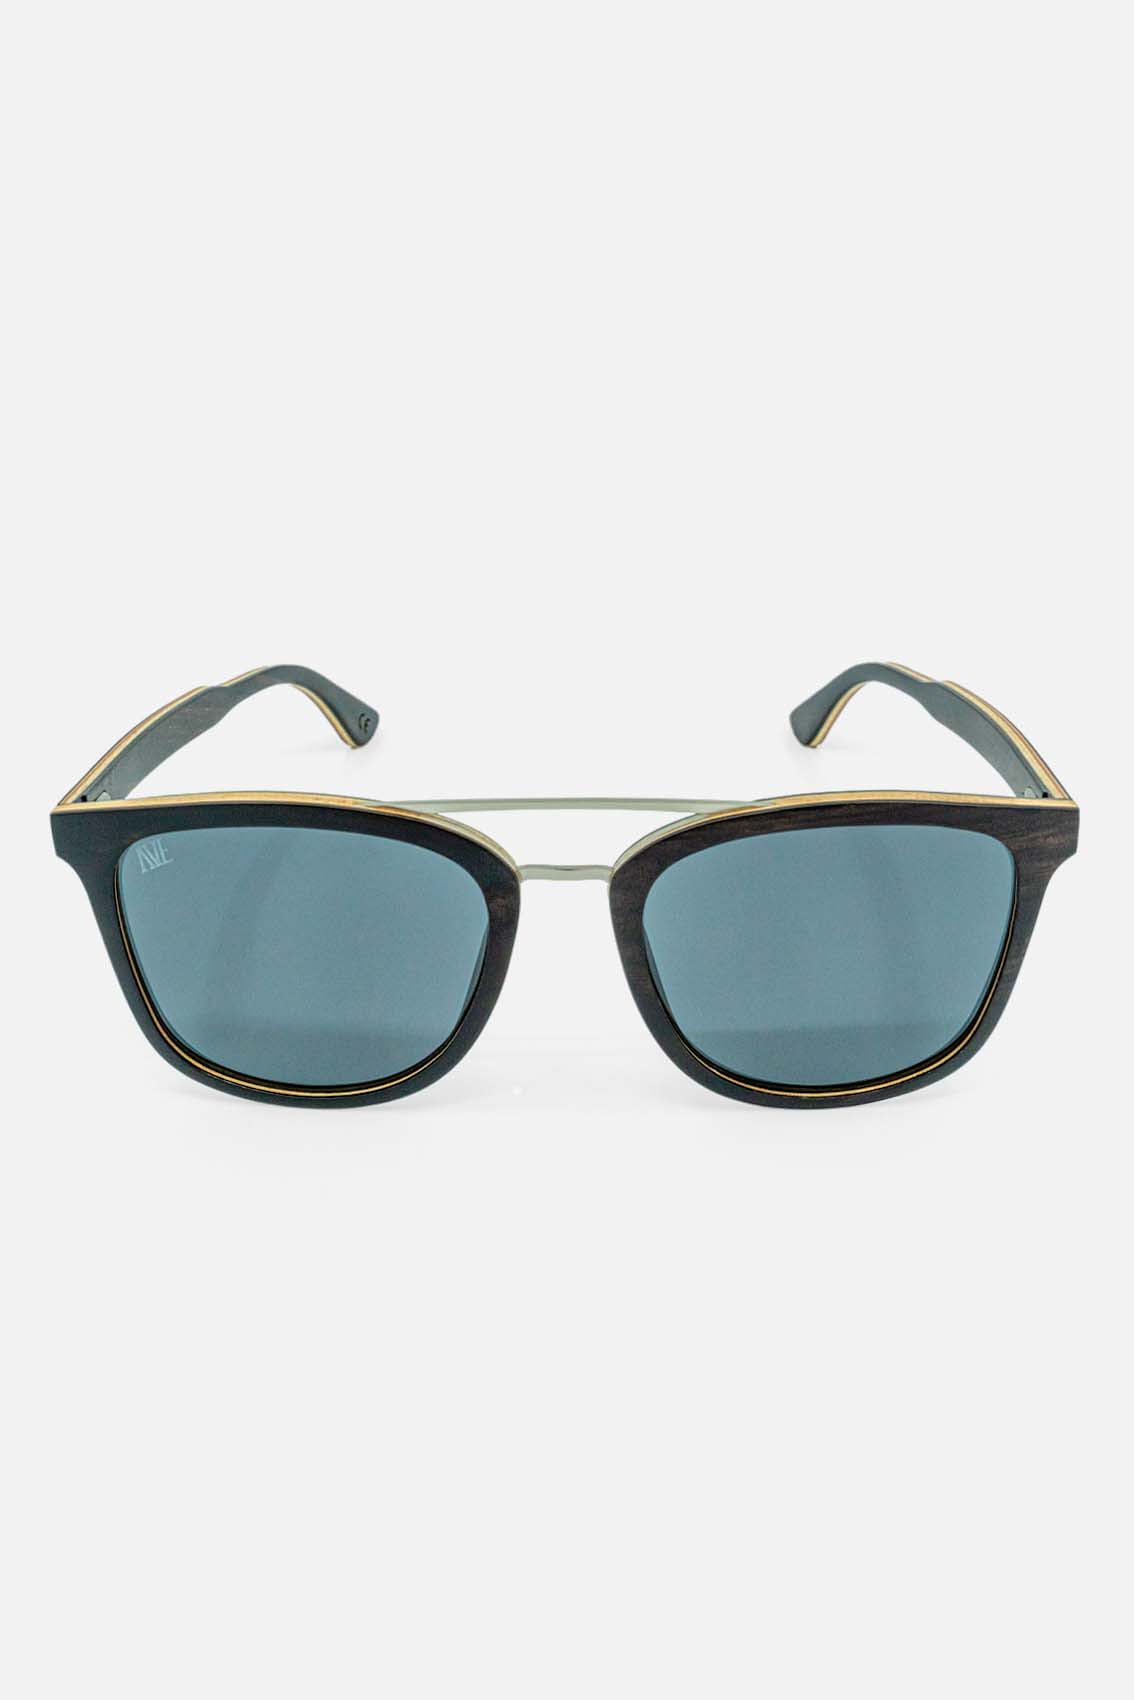 Women's sunglasses with wooden frame and glass not mirrored